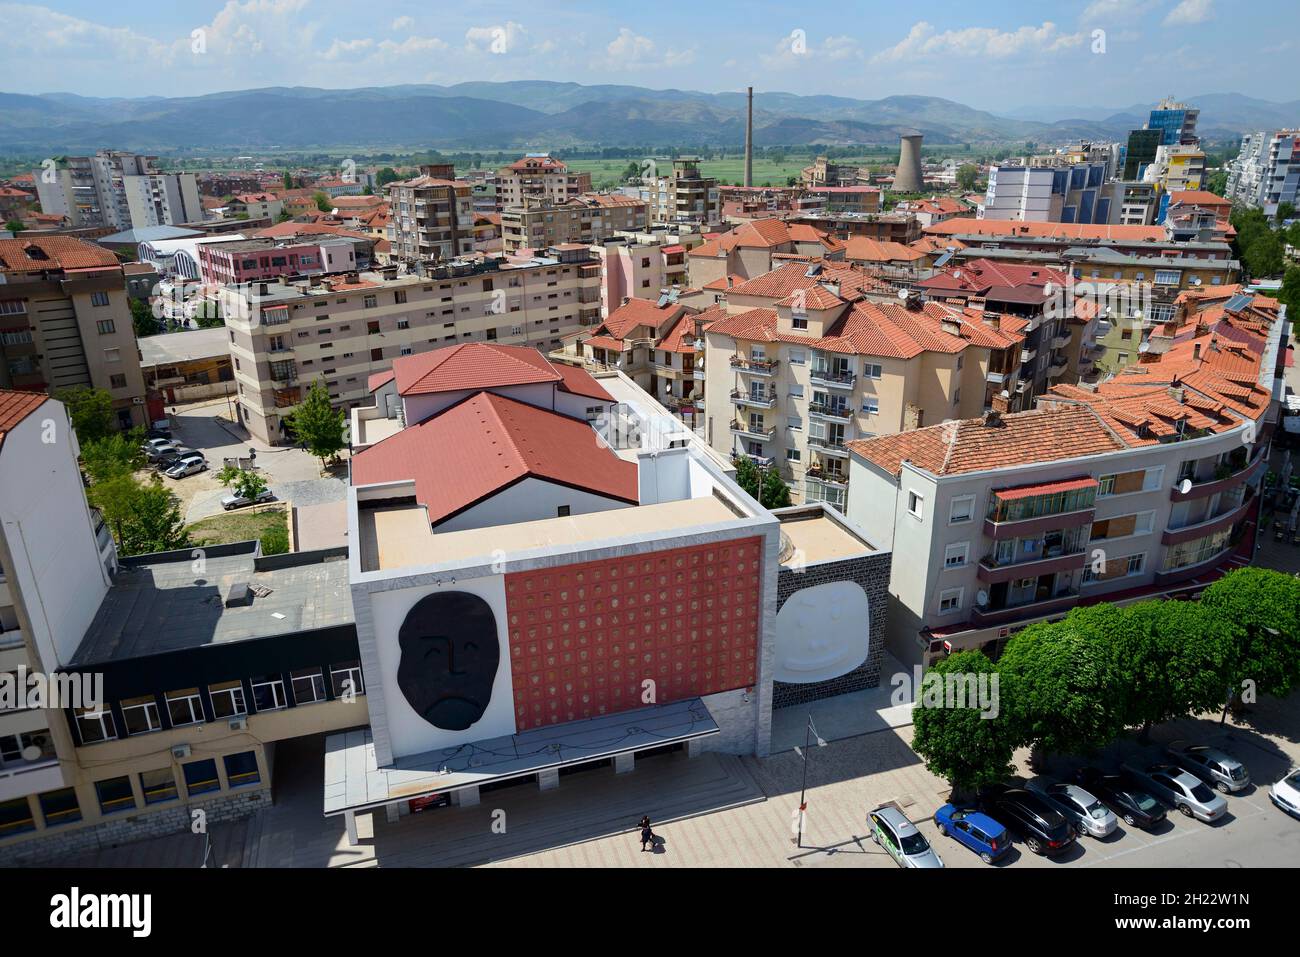 View from Red Tower, Theatre, City Centre, Korca, Korca, Albania Stock Photo